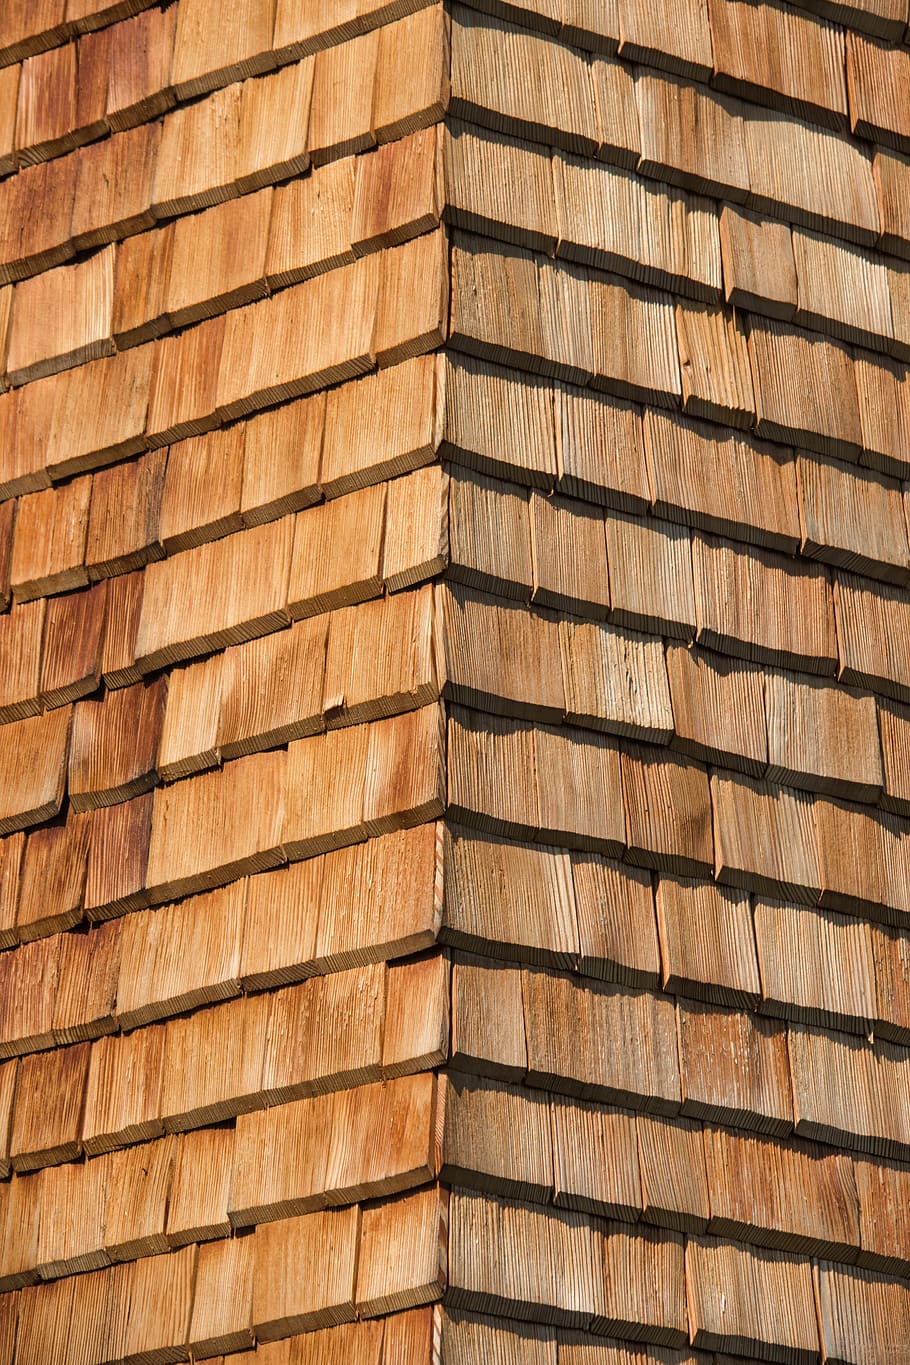 shingle, wood shingles, facade, facade cladding, full frame, backgrounds, pattern, repetition, brown, textured